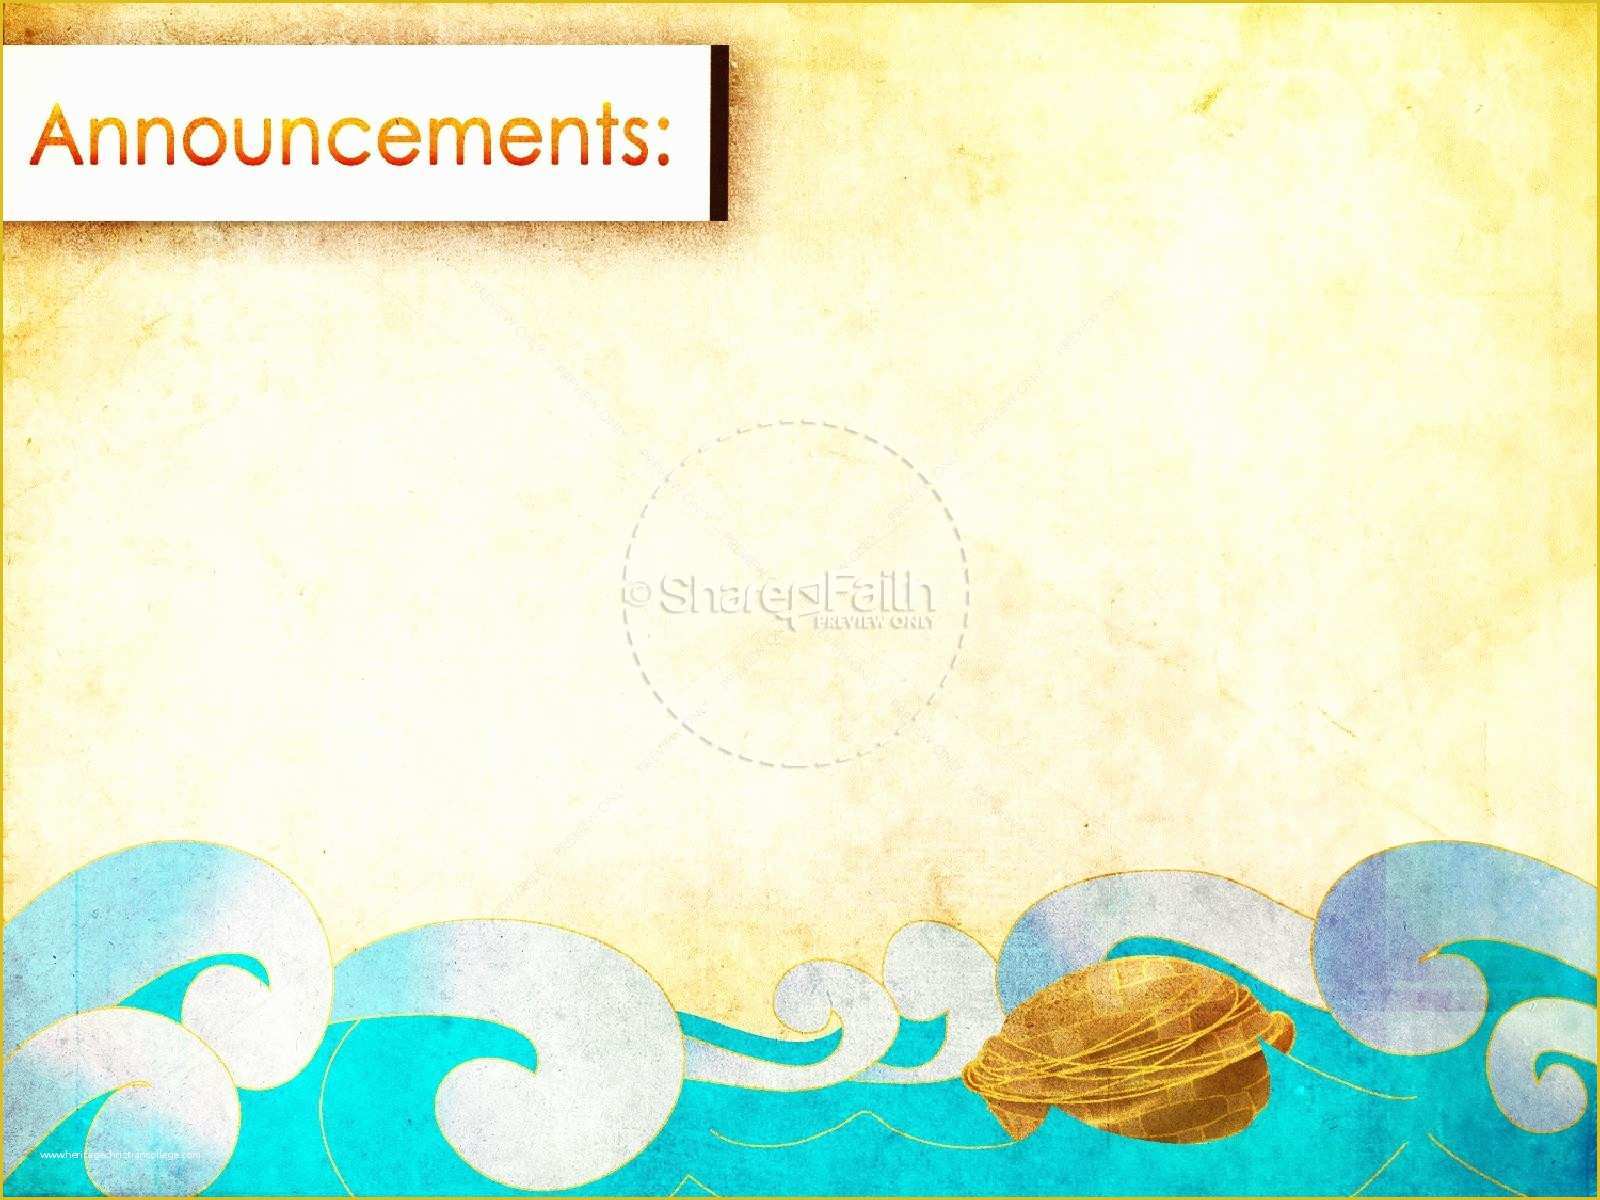 Free Powerpoint Templates for Church Announcements Of the Gallery for Announcement Background Powerpoint